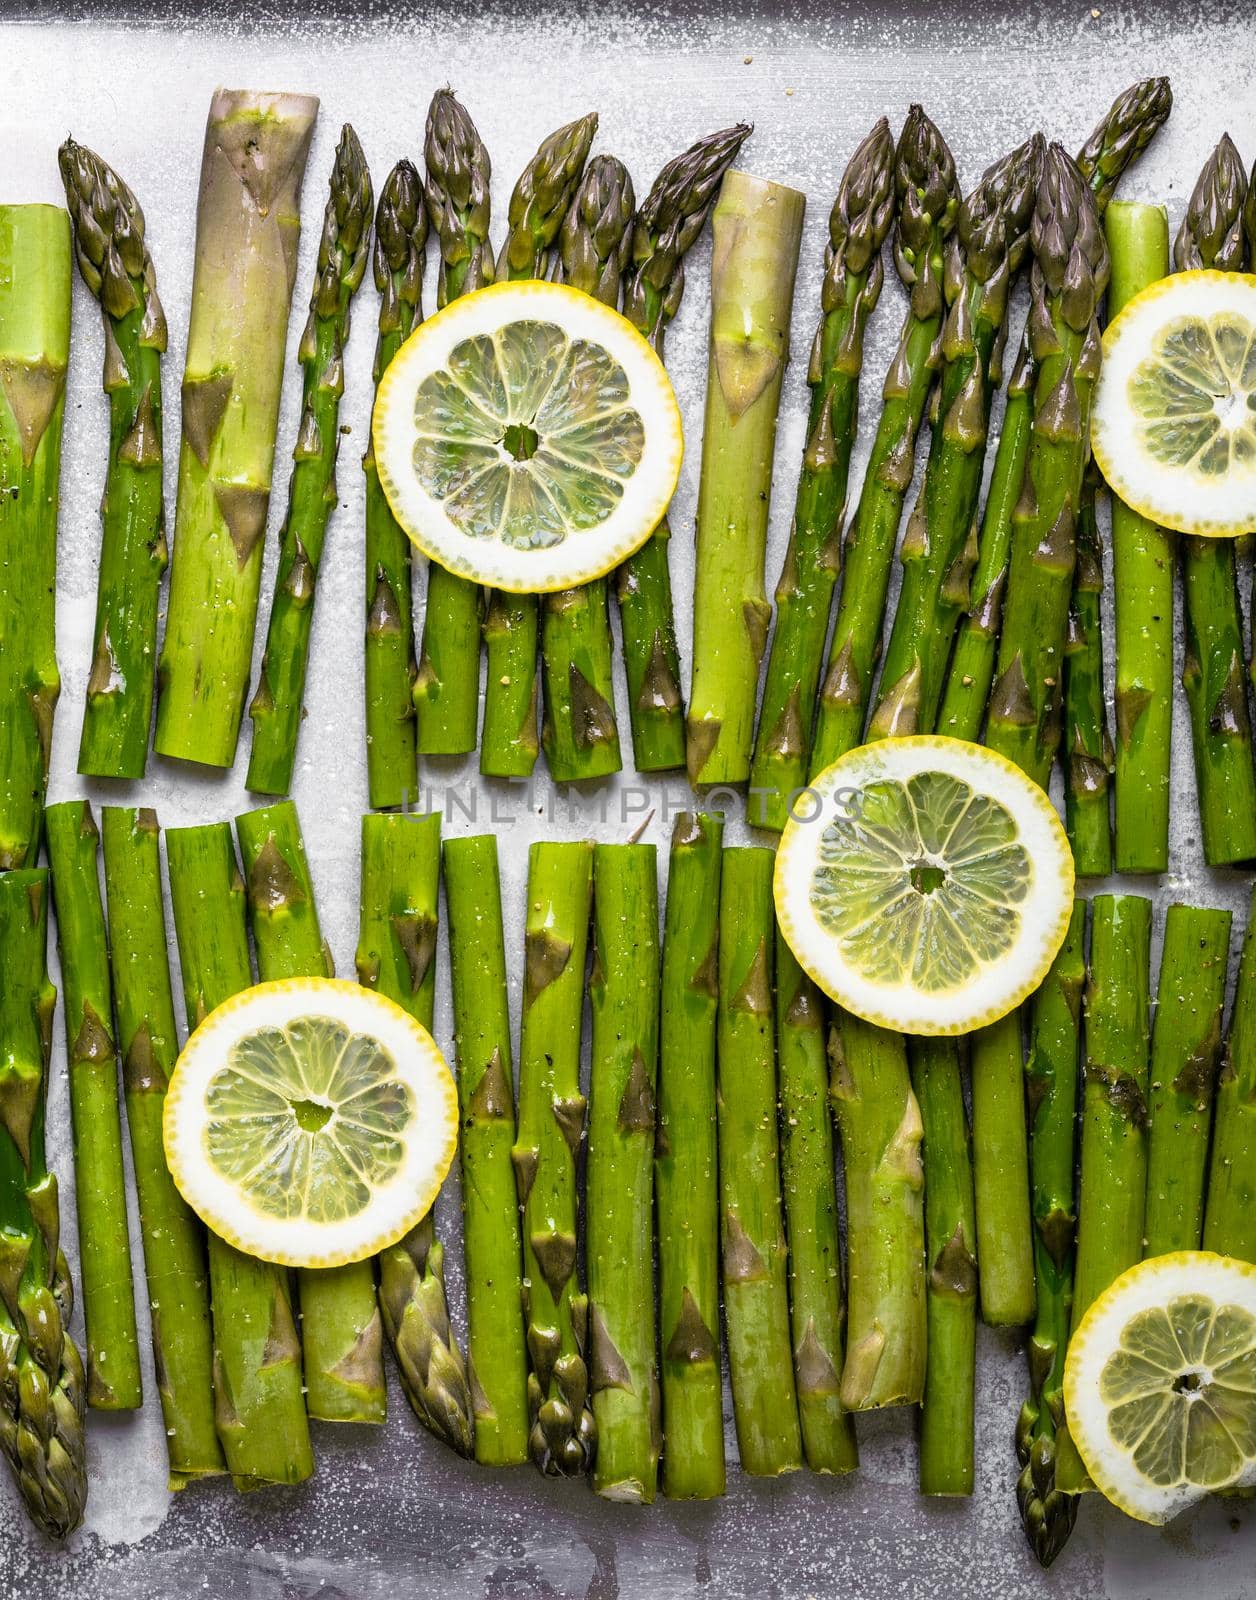 Close-up of fresh green asparagus. Bunch of organic asparagus with lemon ready for cooking on baking tray sprinkled with olive oil and seasonings, good for healthy dieting, top view, close up.